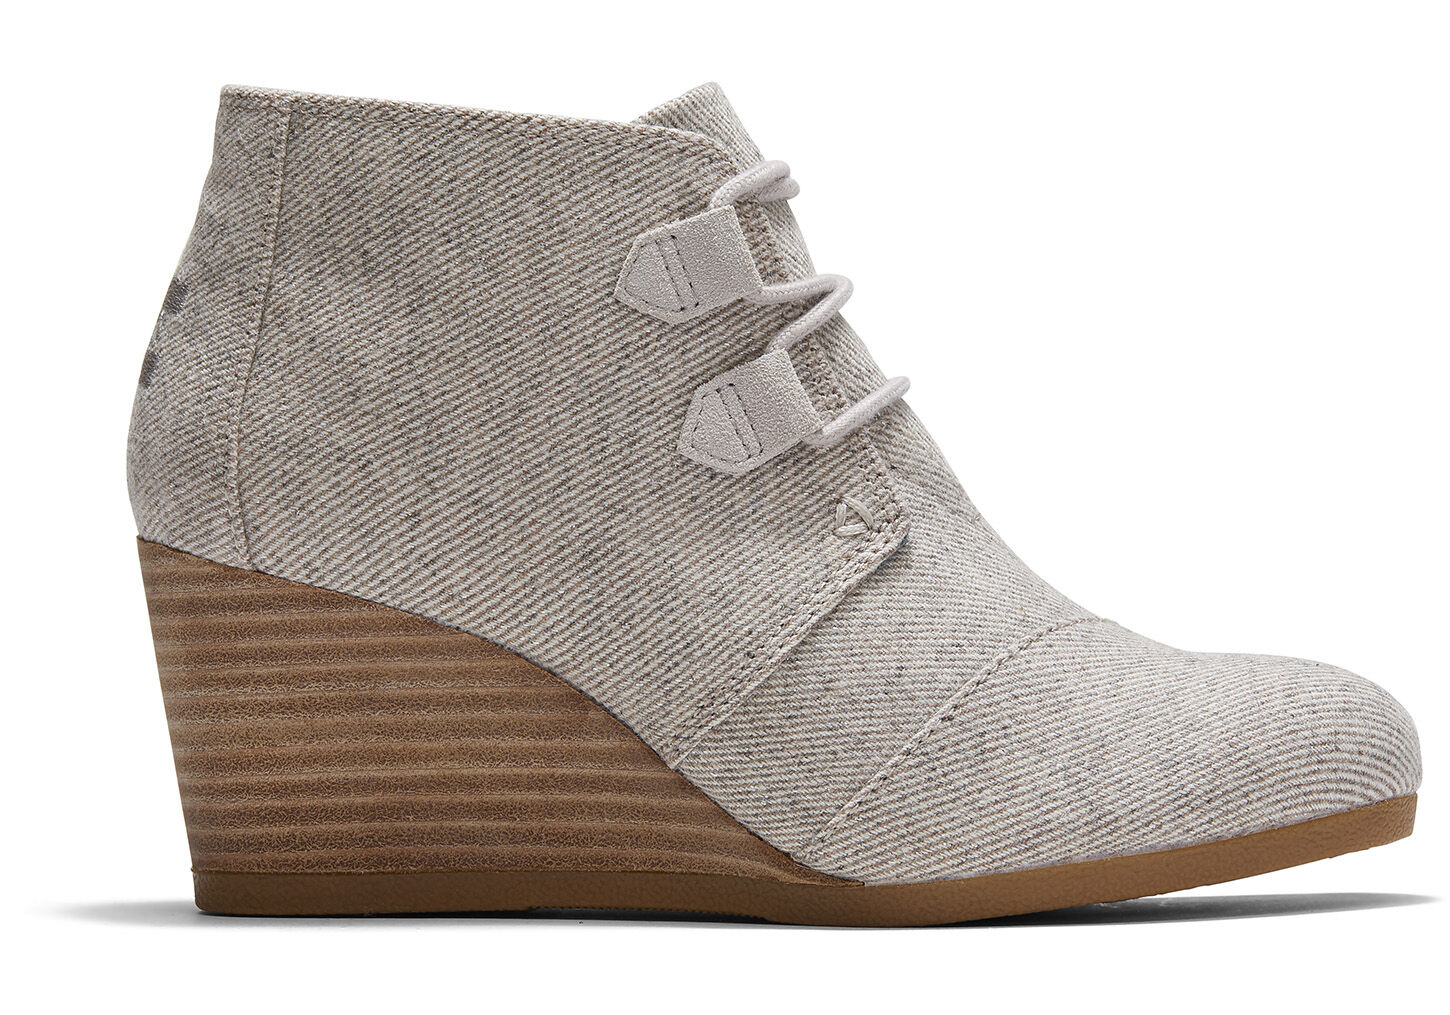 toms booties on sale